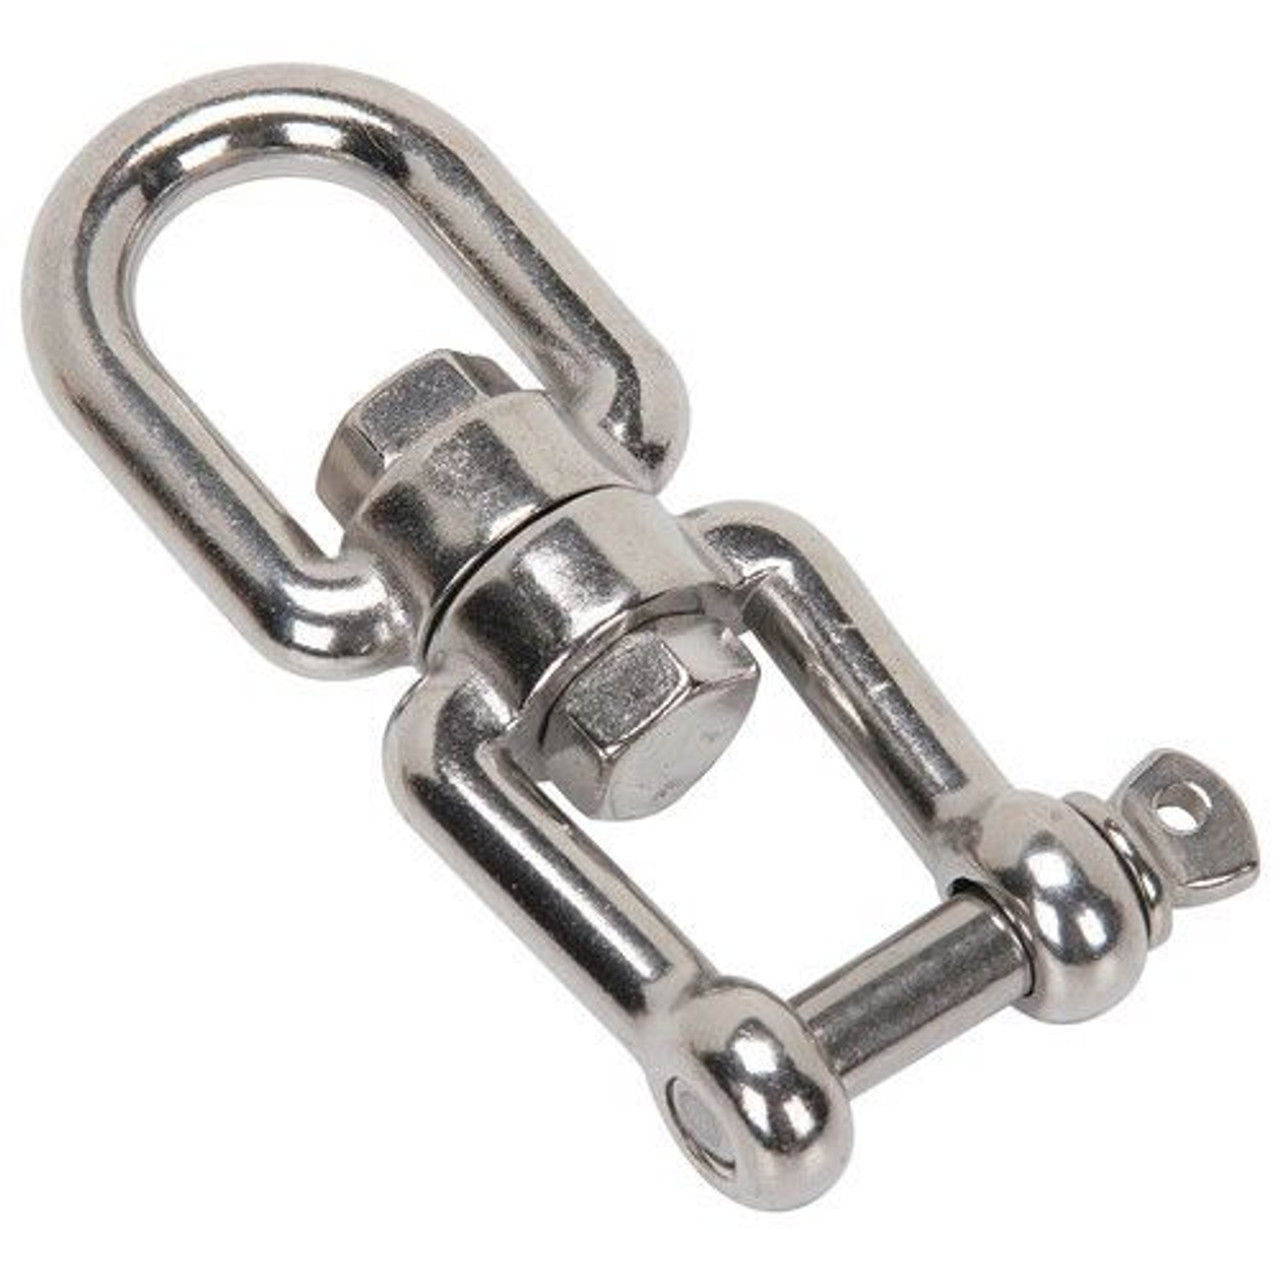 Swivel Eye Shackle Jaw Snap Hooks Double Connector Swing Hook Ceiling  Rotational Hanging Device Accessory Anchor Marine 